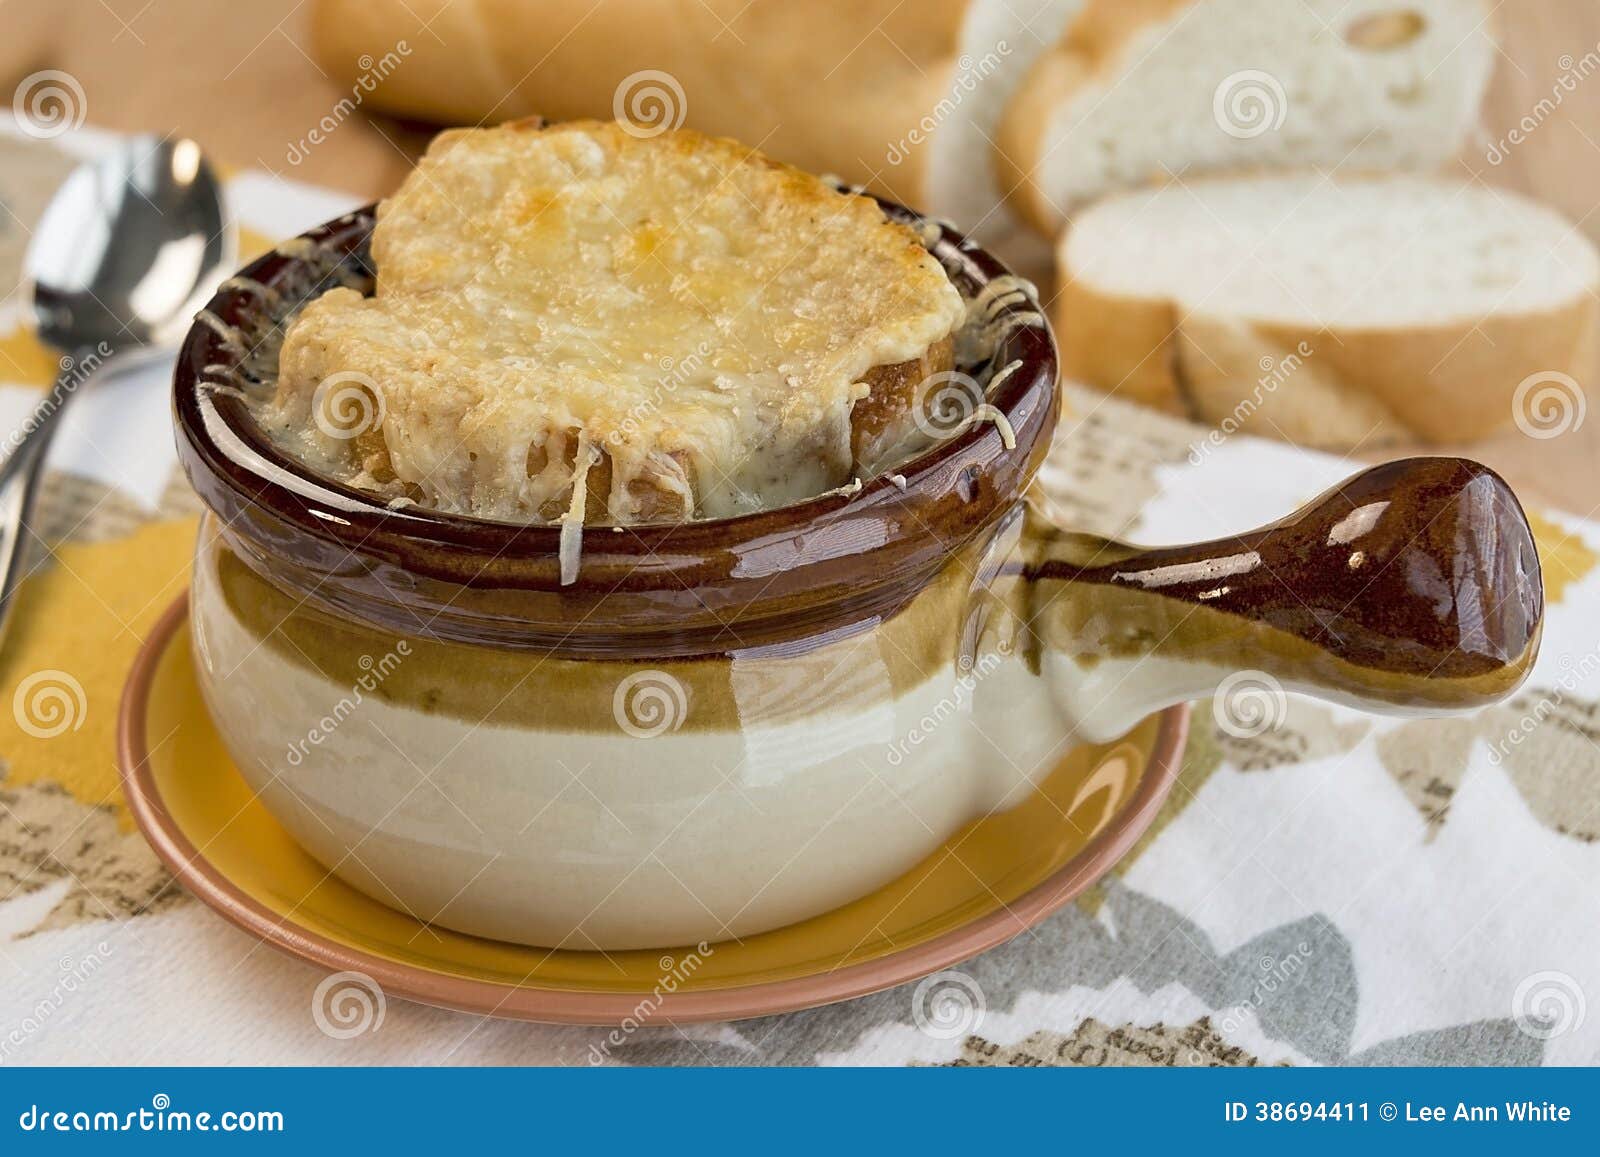 crock of french onion soup